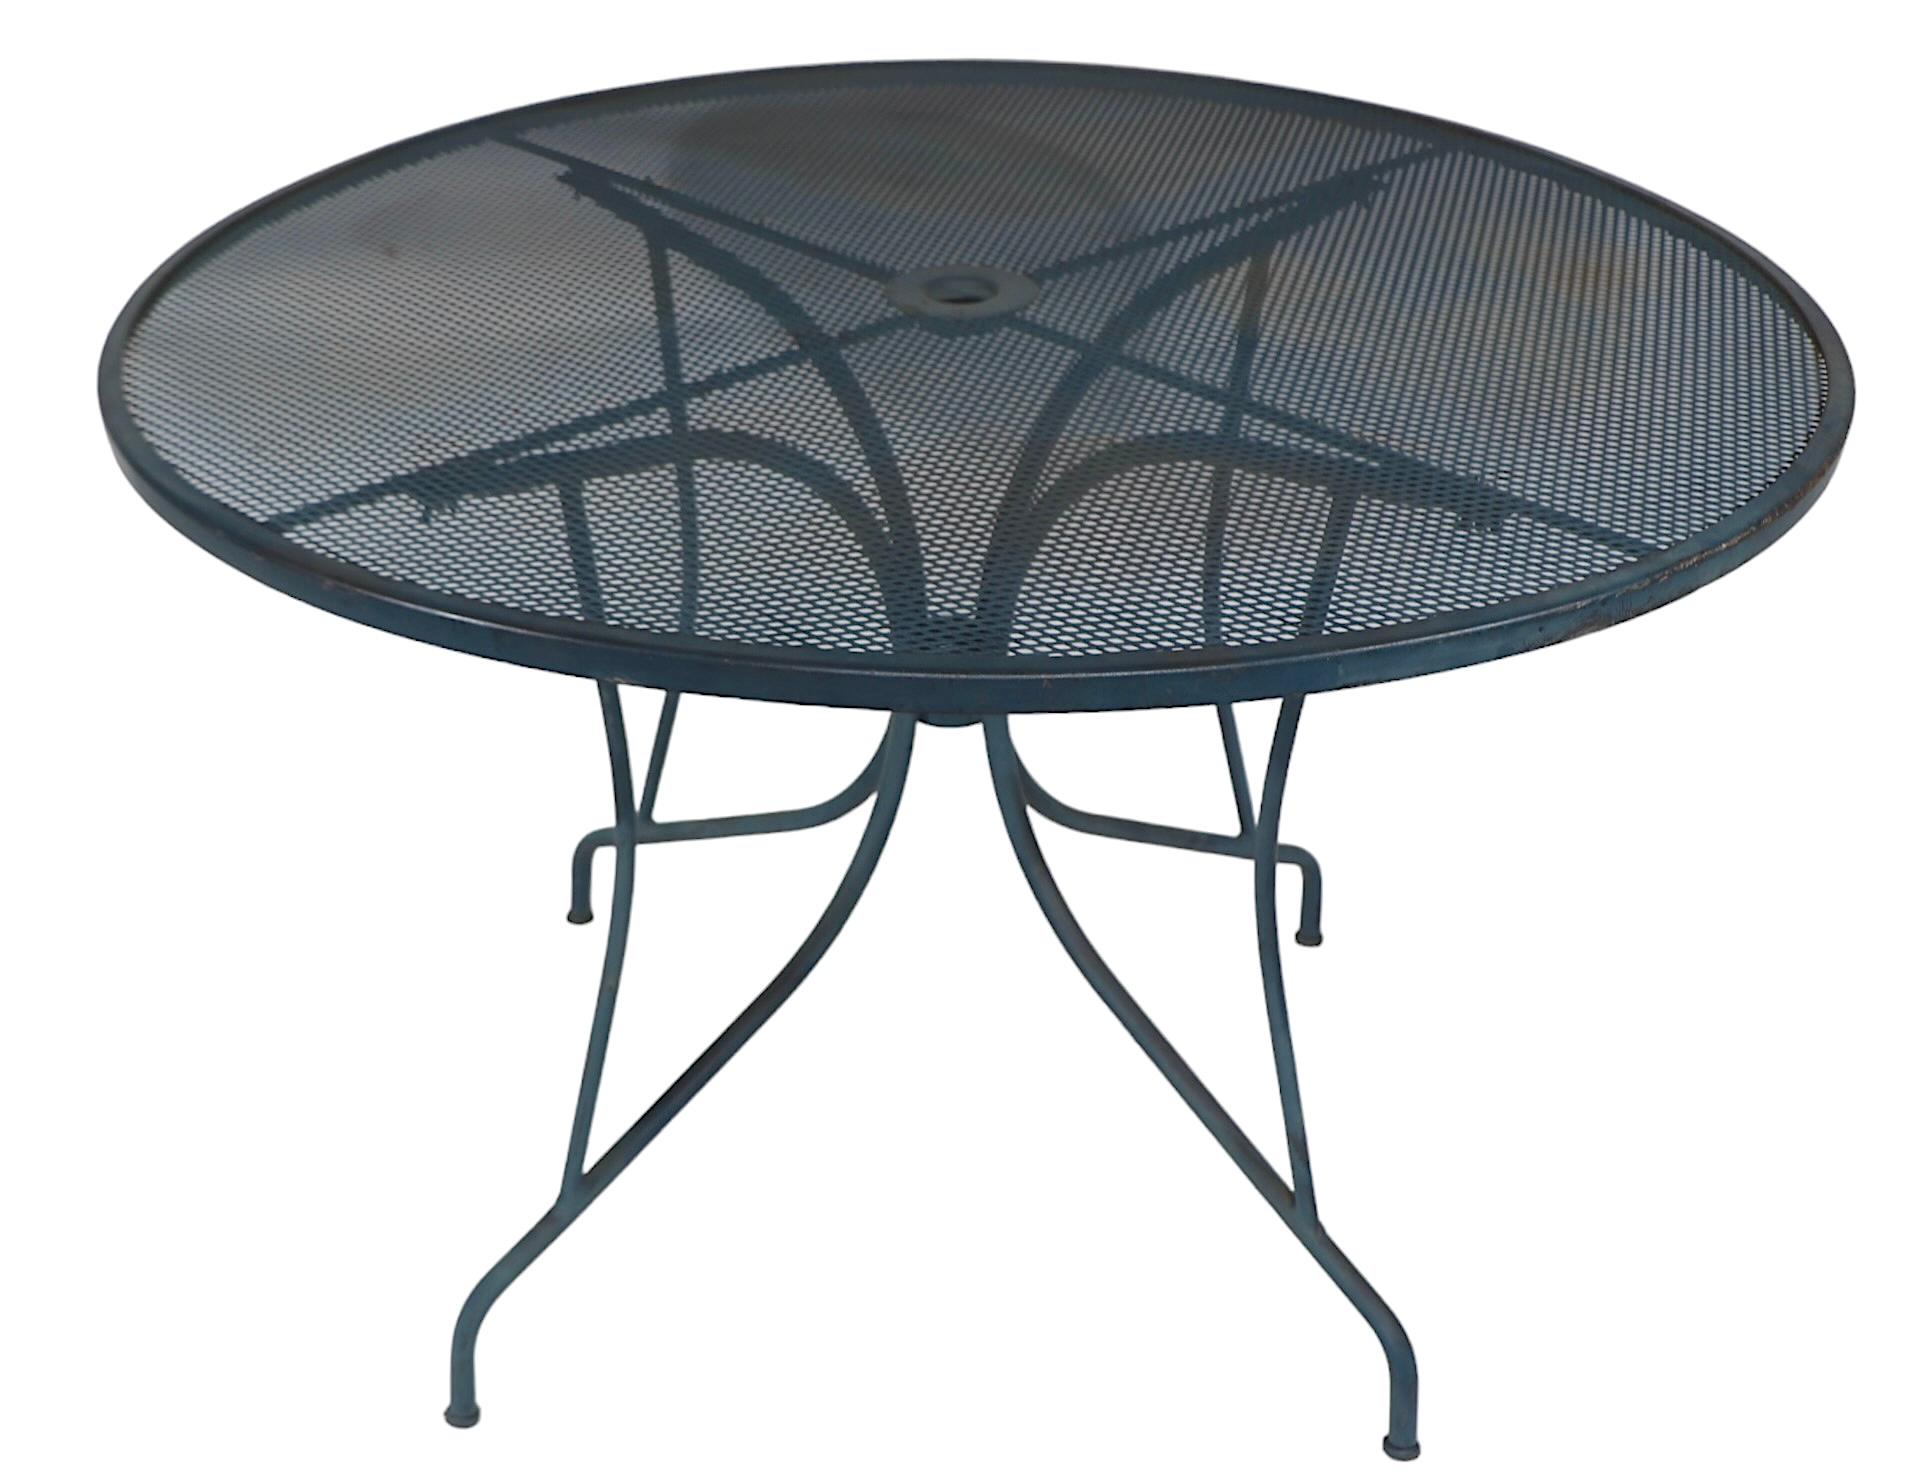 20th Century Vintage Garden Patio Poolside Cafe Dining Table by Meadowcraft c. 1950/60's For Sale